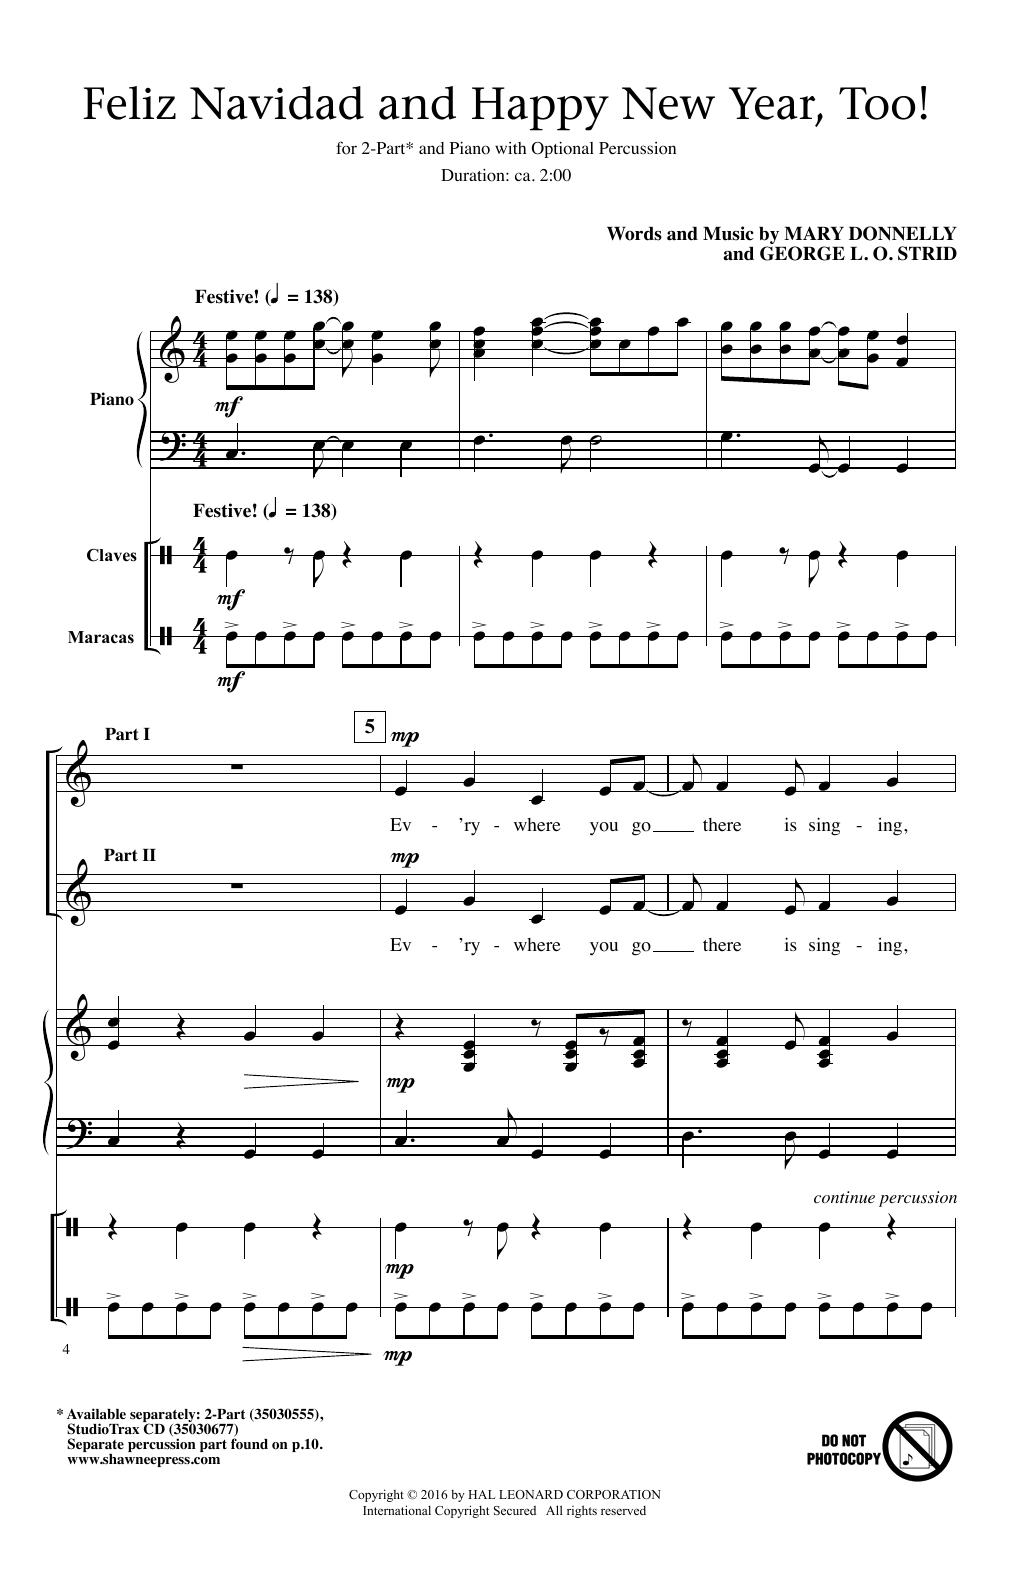 Download Mary Donnelly Feliz Navidad And Happy New Year, Too! Sheet Music